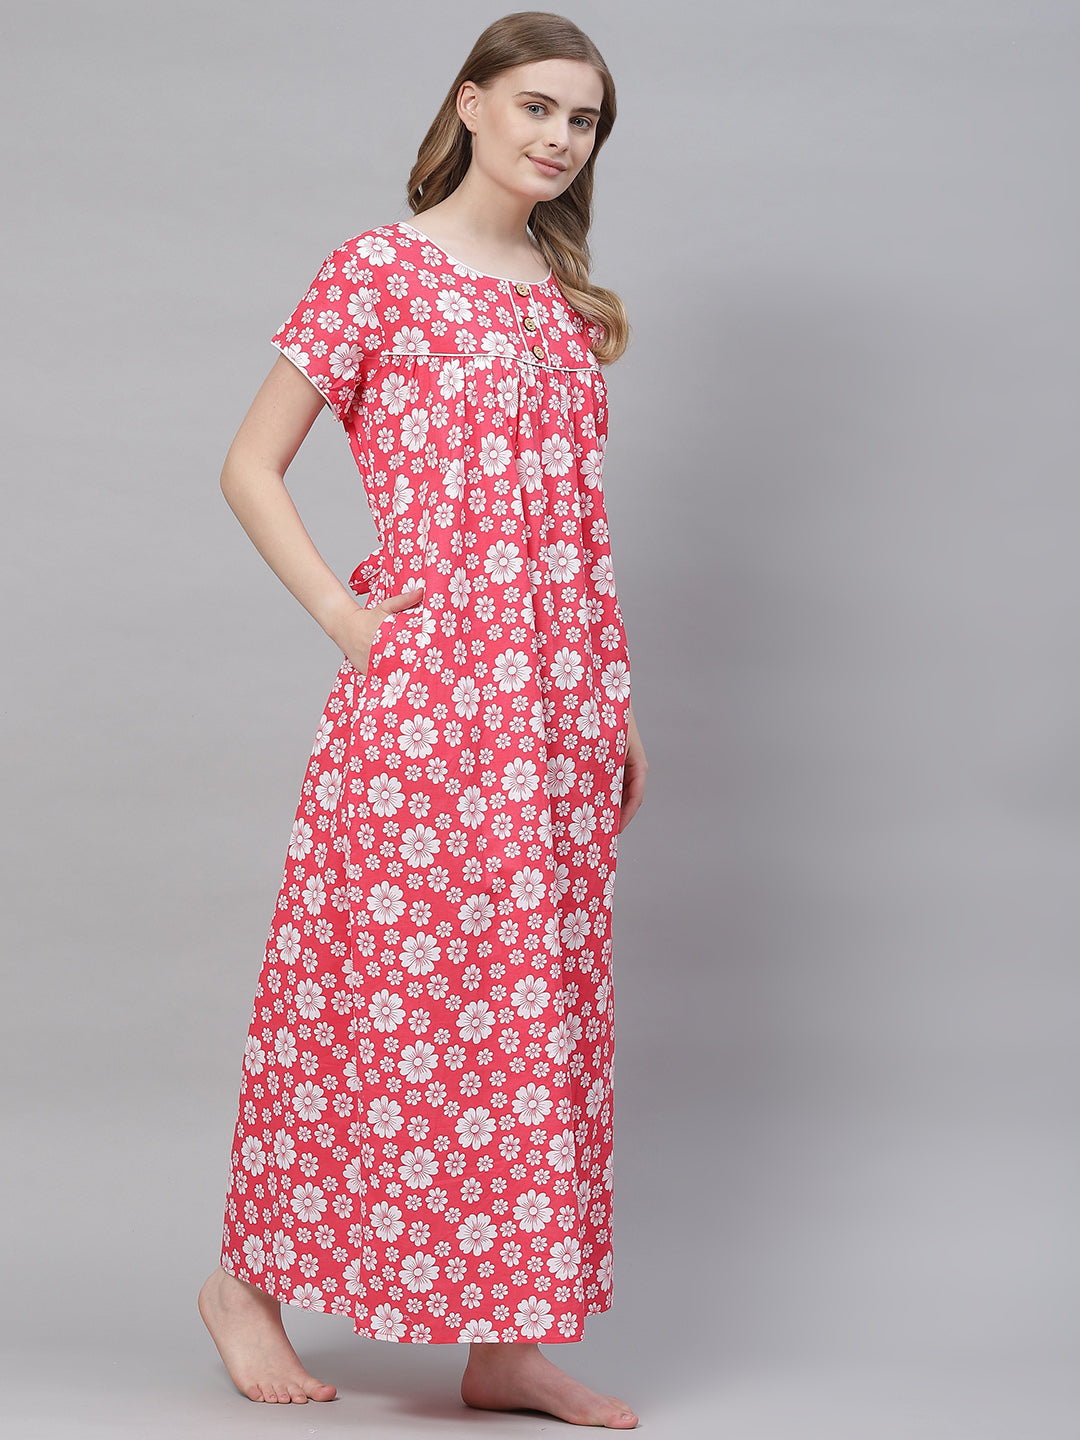 kasya Cotton Nighty for Women in Coral Pink Color - Size XS | Night Gown  Wear with Pockets | Comfortable and Stylish Sleepwear Fancy Maxi Dress :  Amazon.in: Fashion